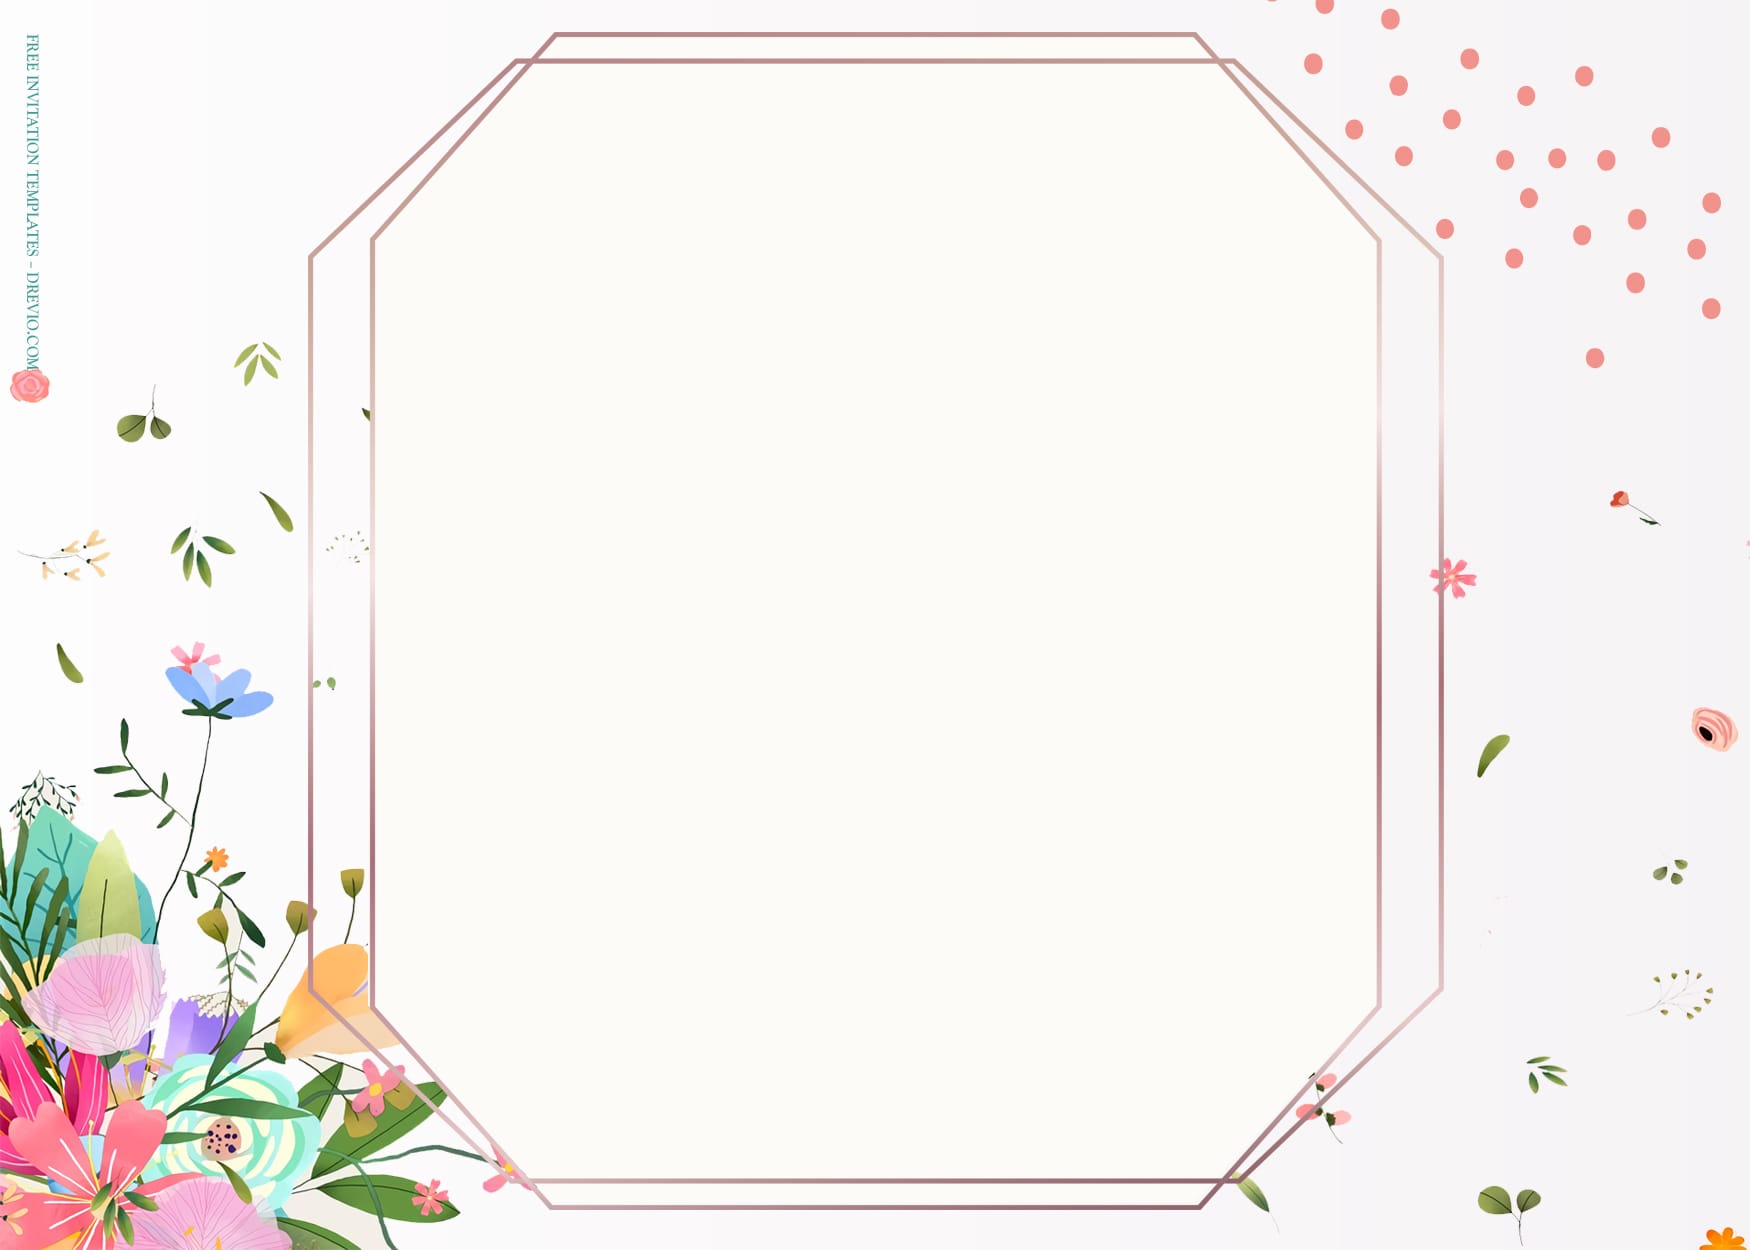 7+ Static And Animated Floral Wedding Invitation Templates Type two